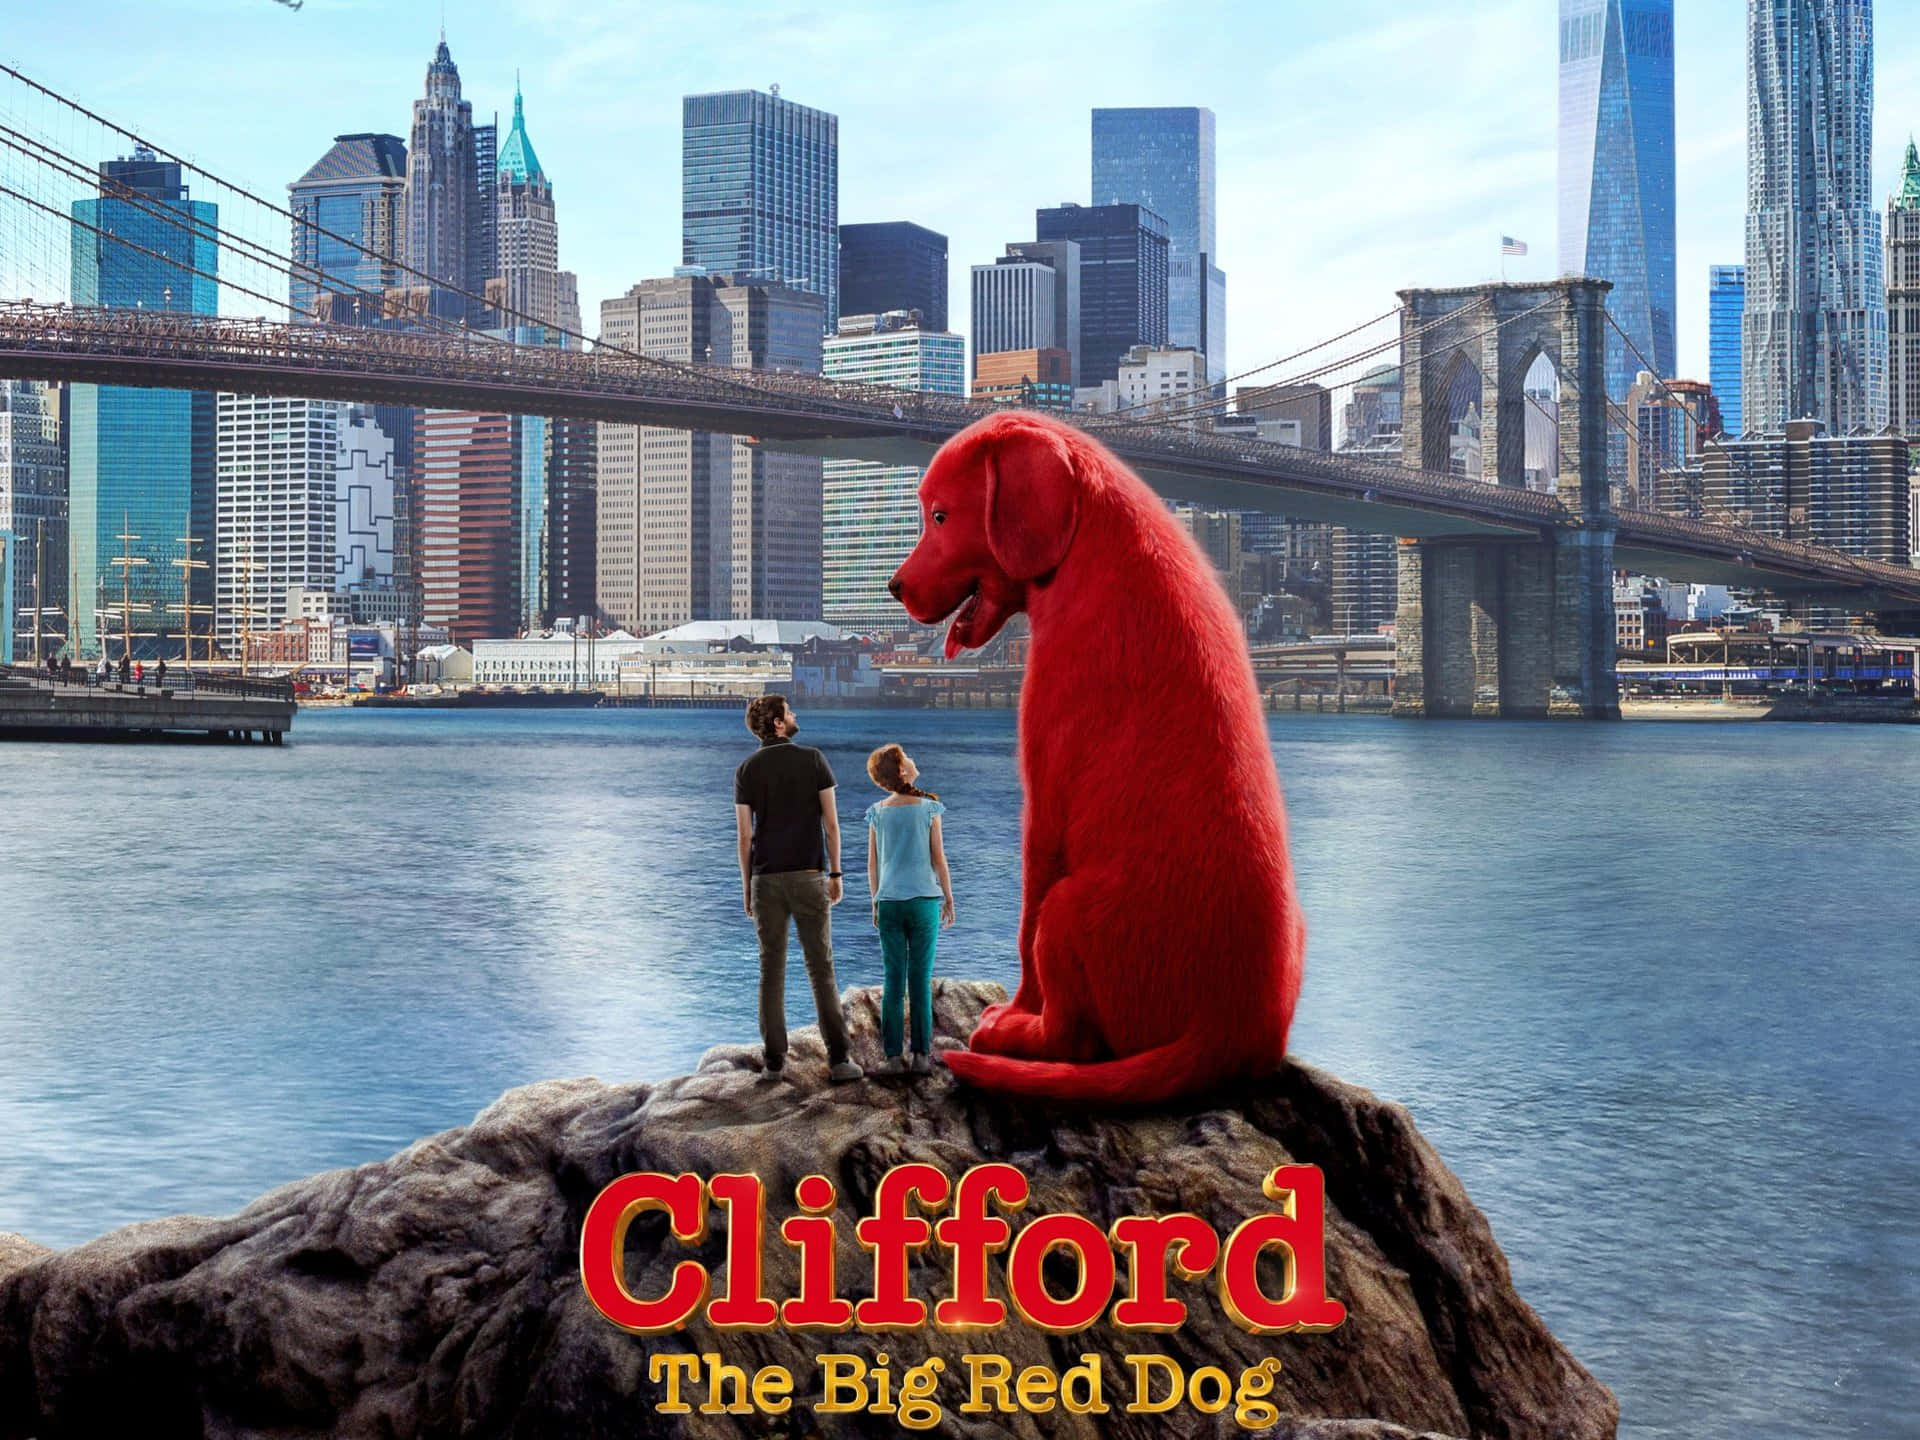 The beloved Big Red Dog, Clifford, plays with his friends